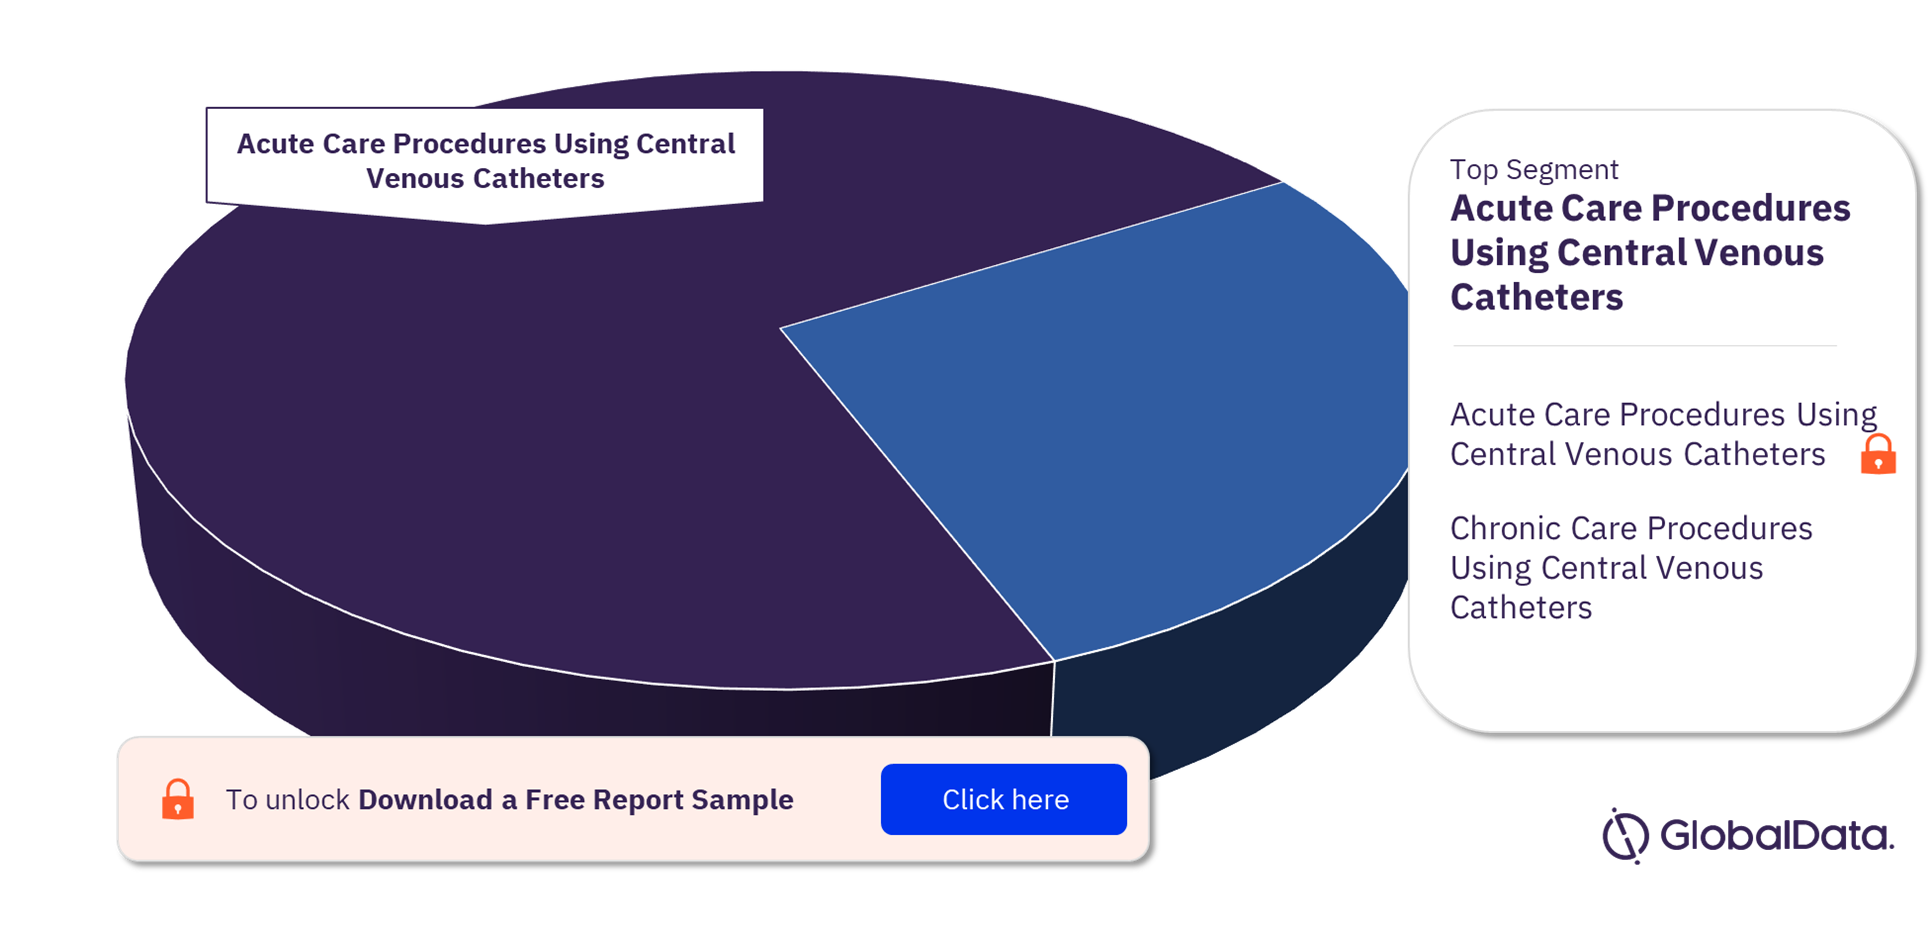 Russia Procedures Using Central Venous Catheters Market Analysis by Segments, 2022 (%)